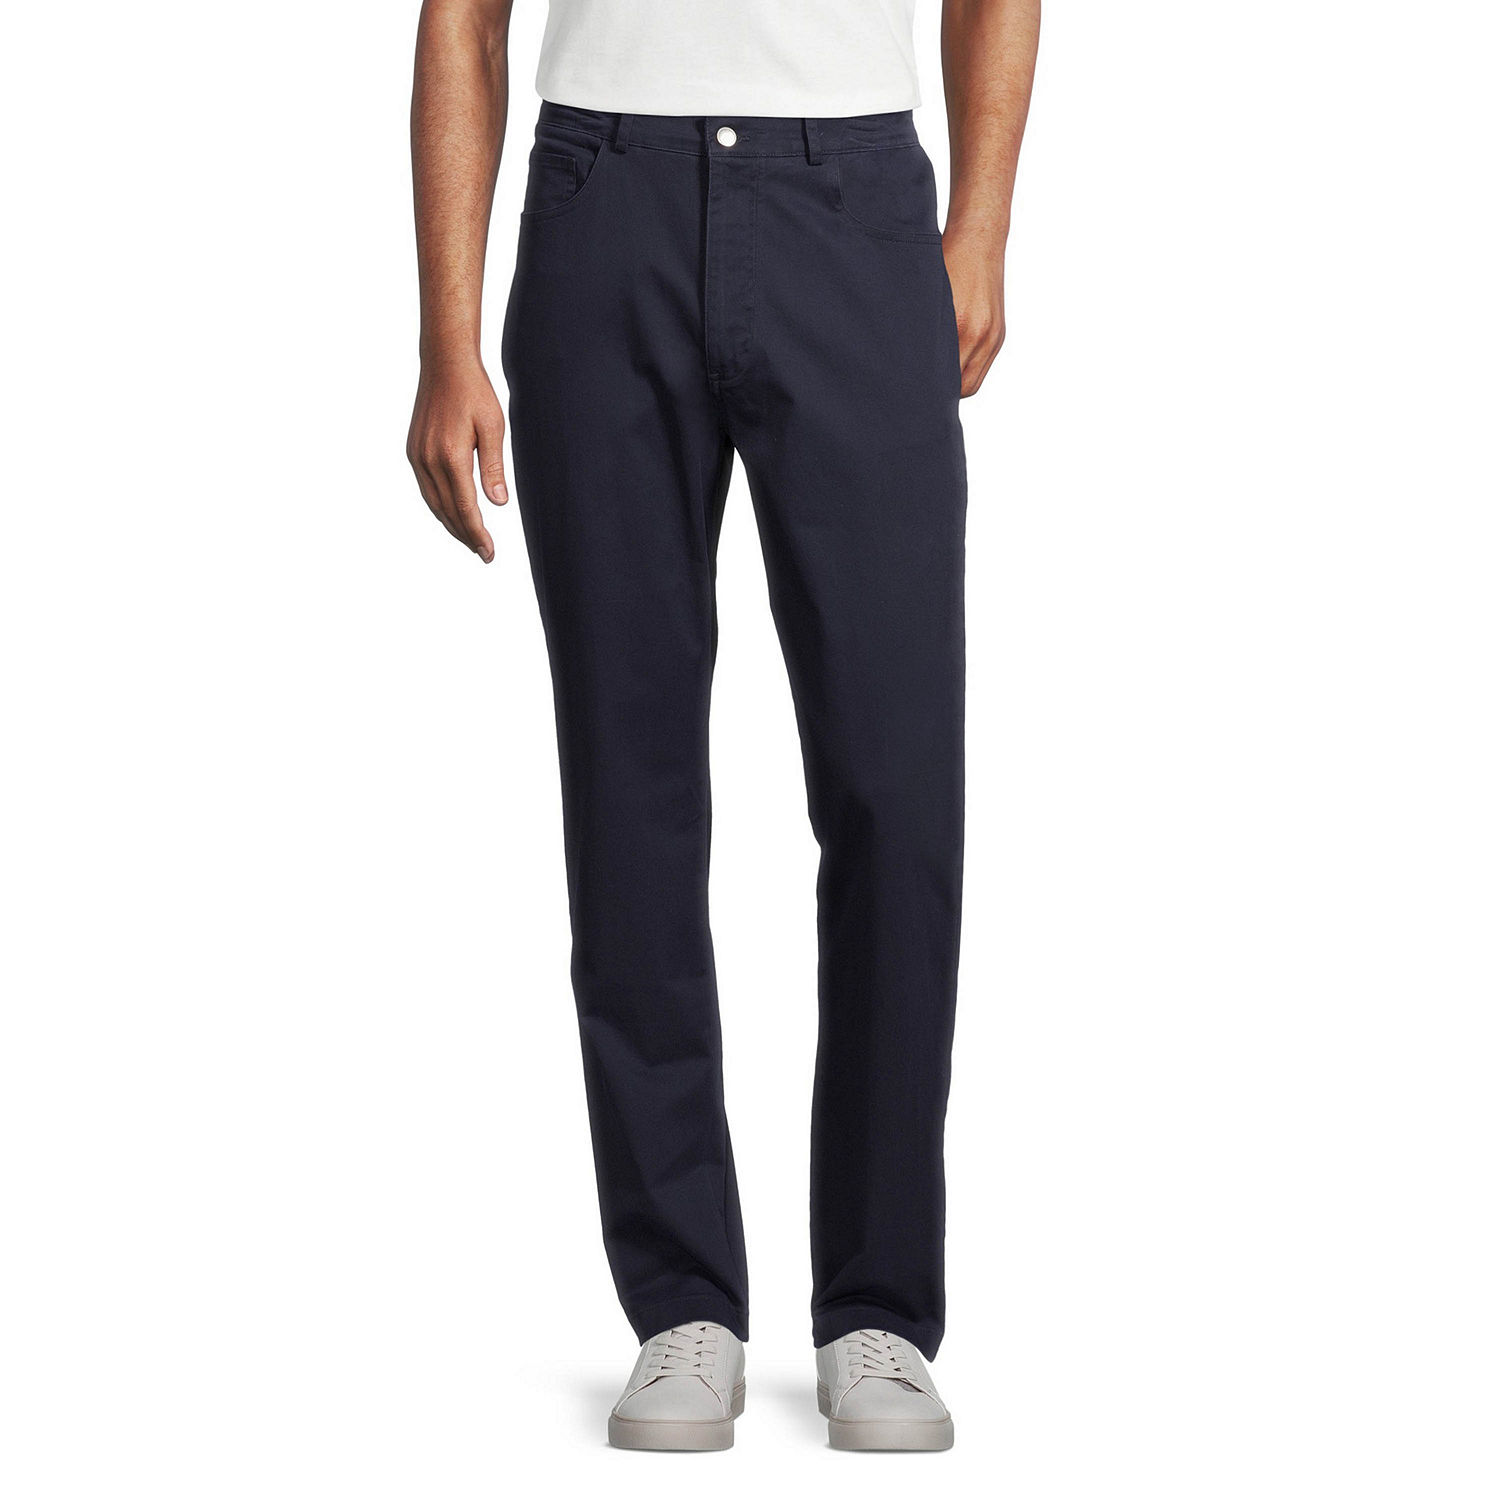 Stafford Mens Regular Fit Flat Front Pant - JCPenney